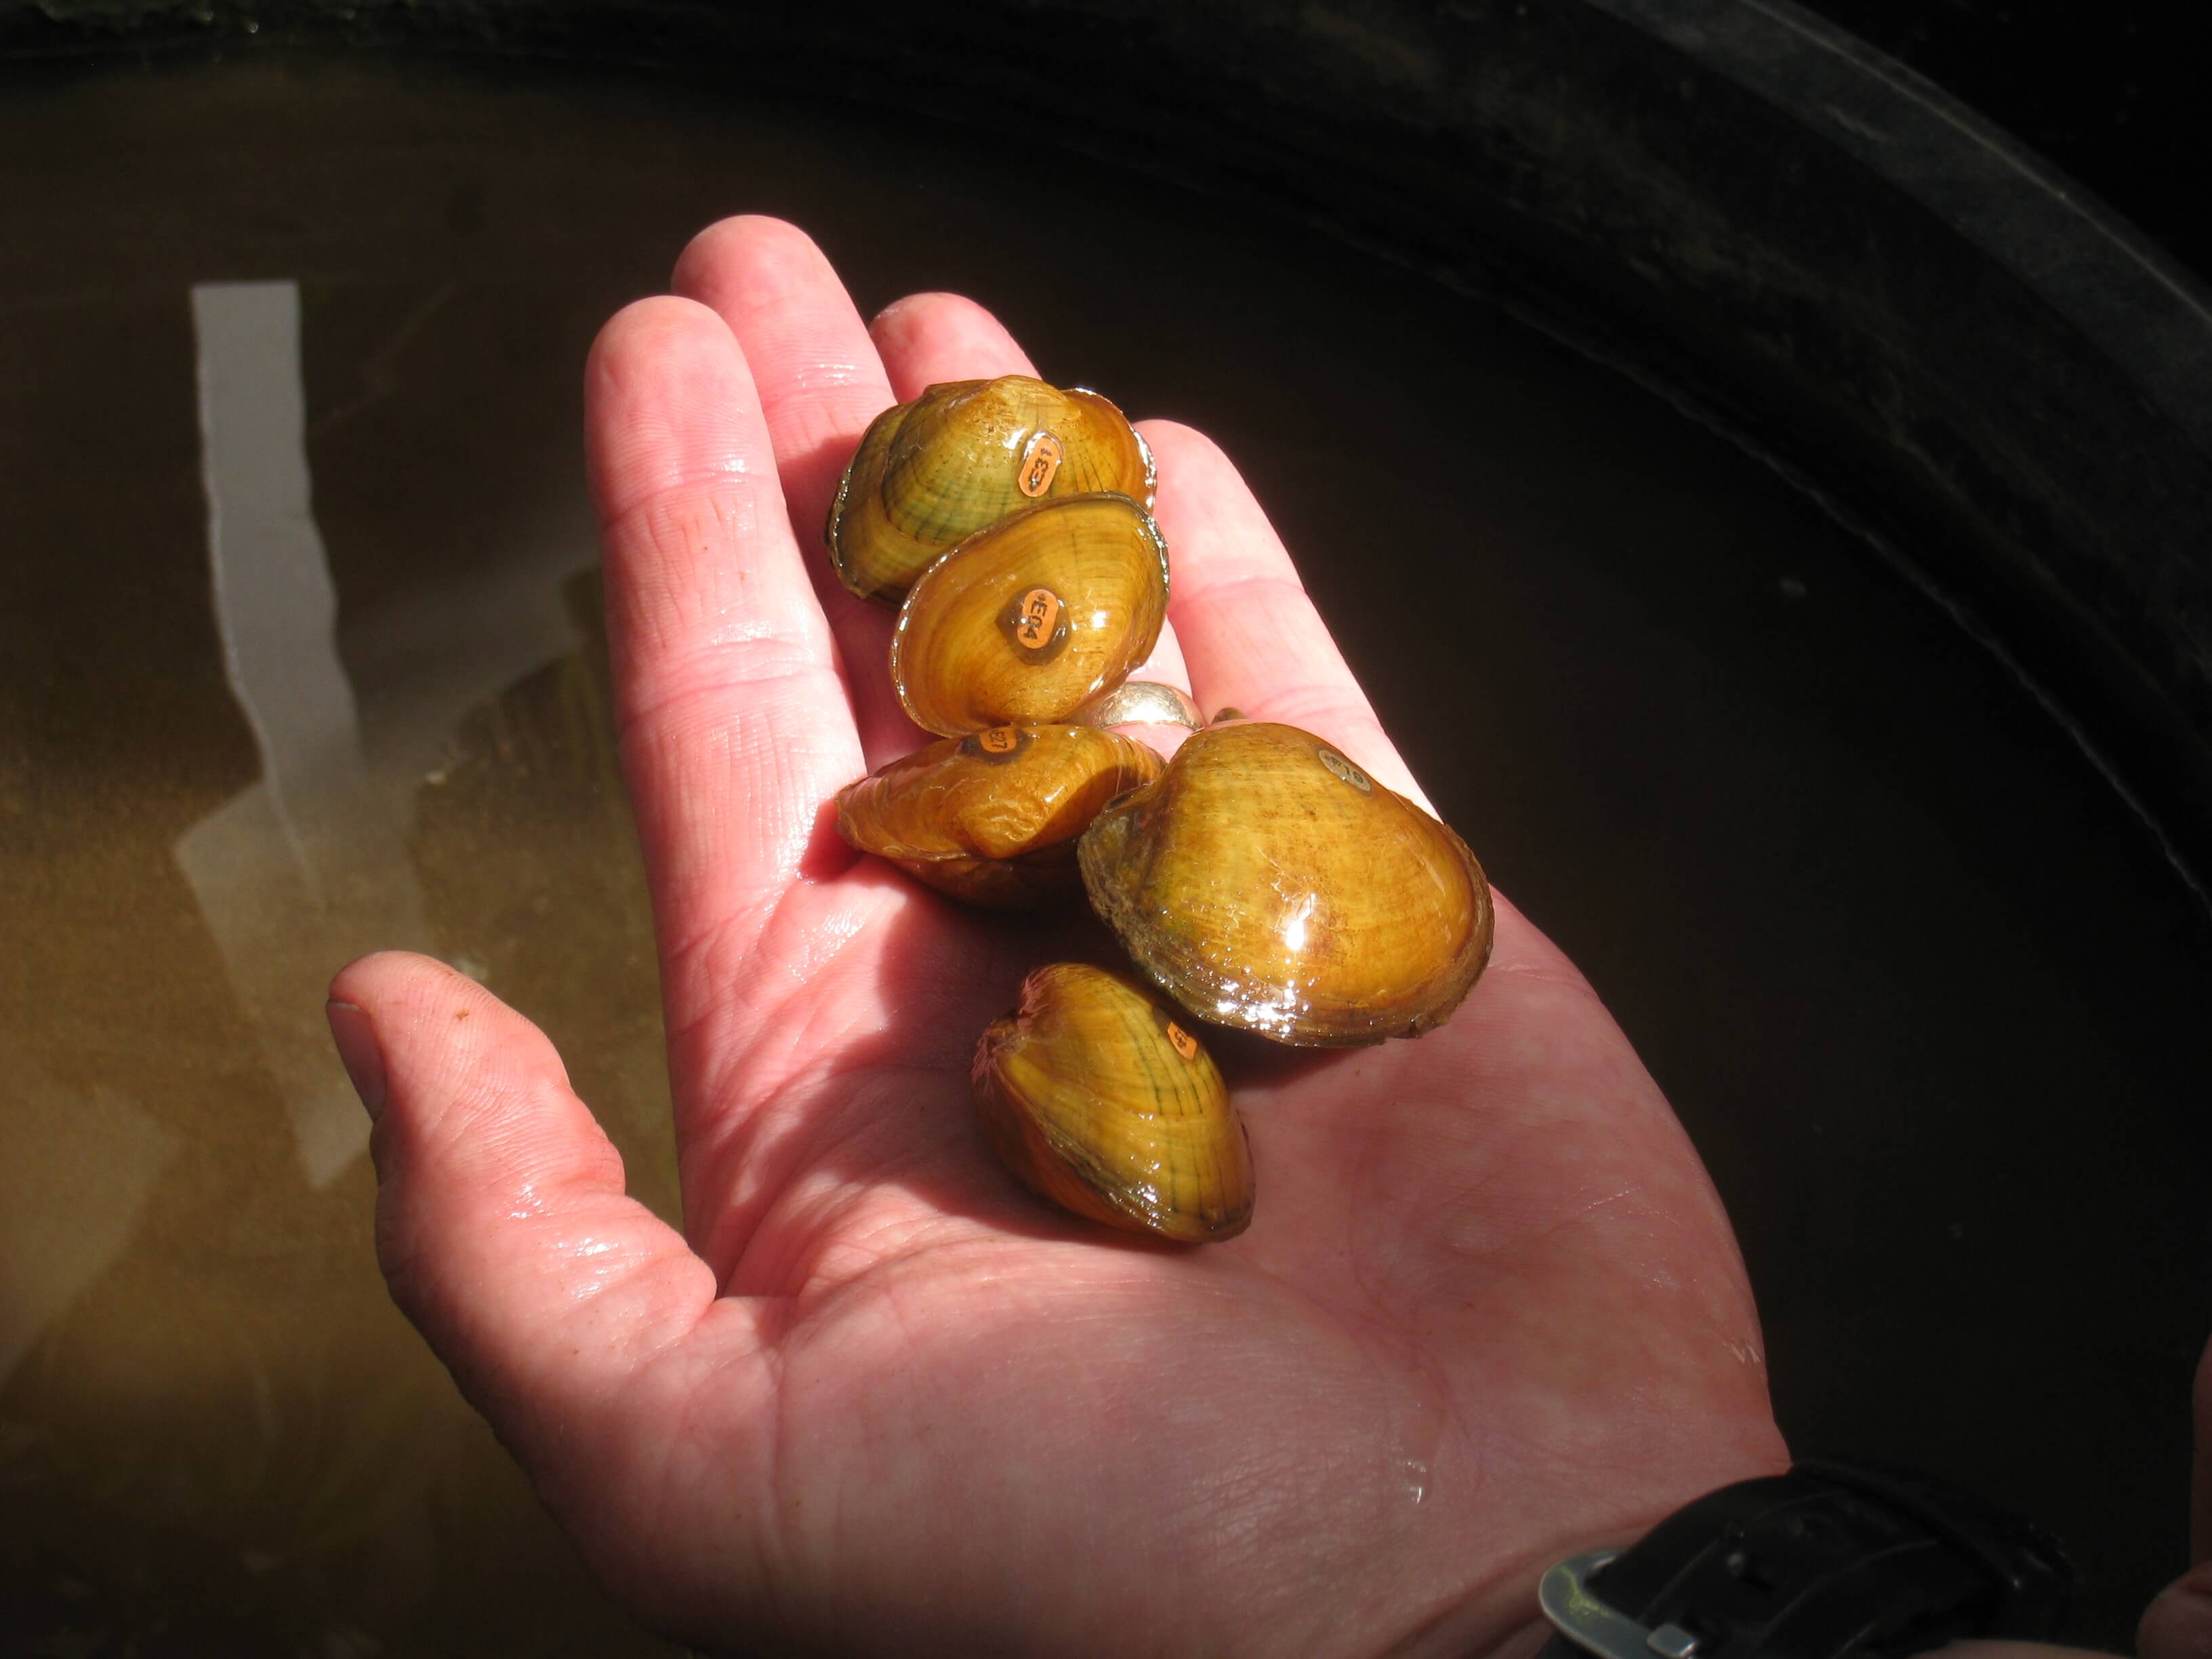 Adult mussels are tagged and held to allow for spawning.  Offspring are reared and stocked in local rivers to restore naturally occurring populations.  The Center for Mollusk Conservation has worked with over 70 species of freshwater mussels.